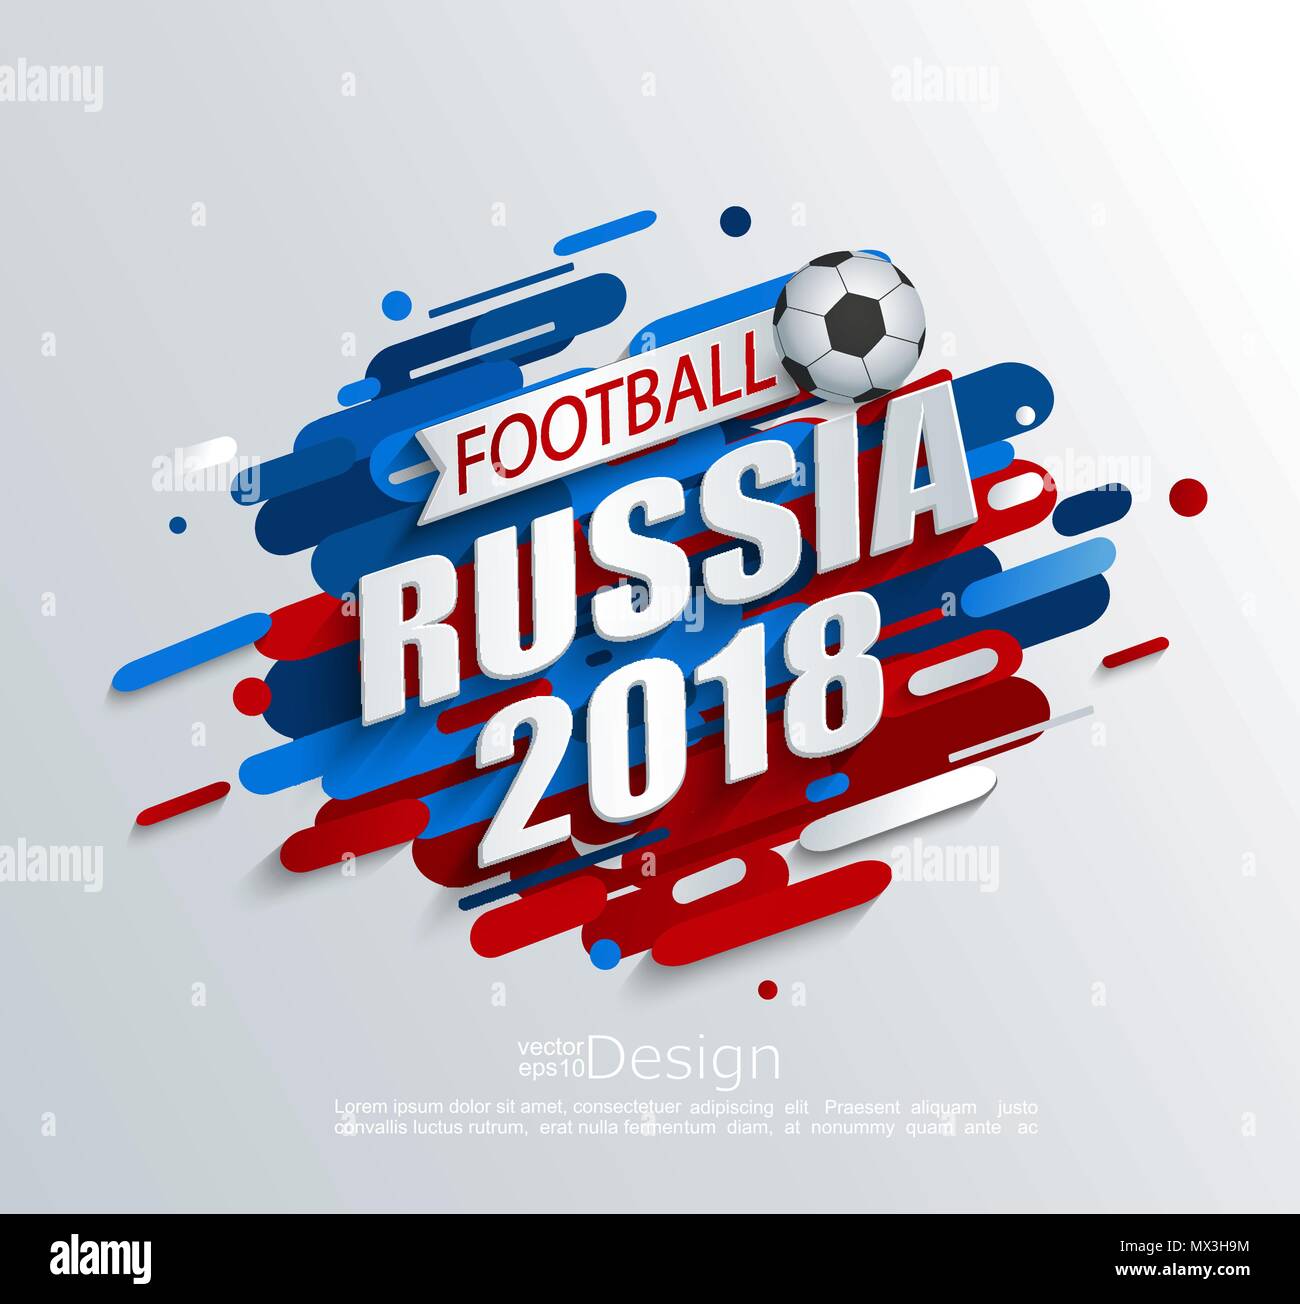 Vector illustration for a football cup 2018 with dynamic background and ball. For the soccer championship.Perfect for design cards, invitations, gift cards, flyers, brochures, banners and so on. Stock Vector